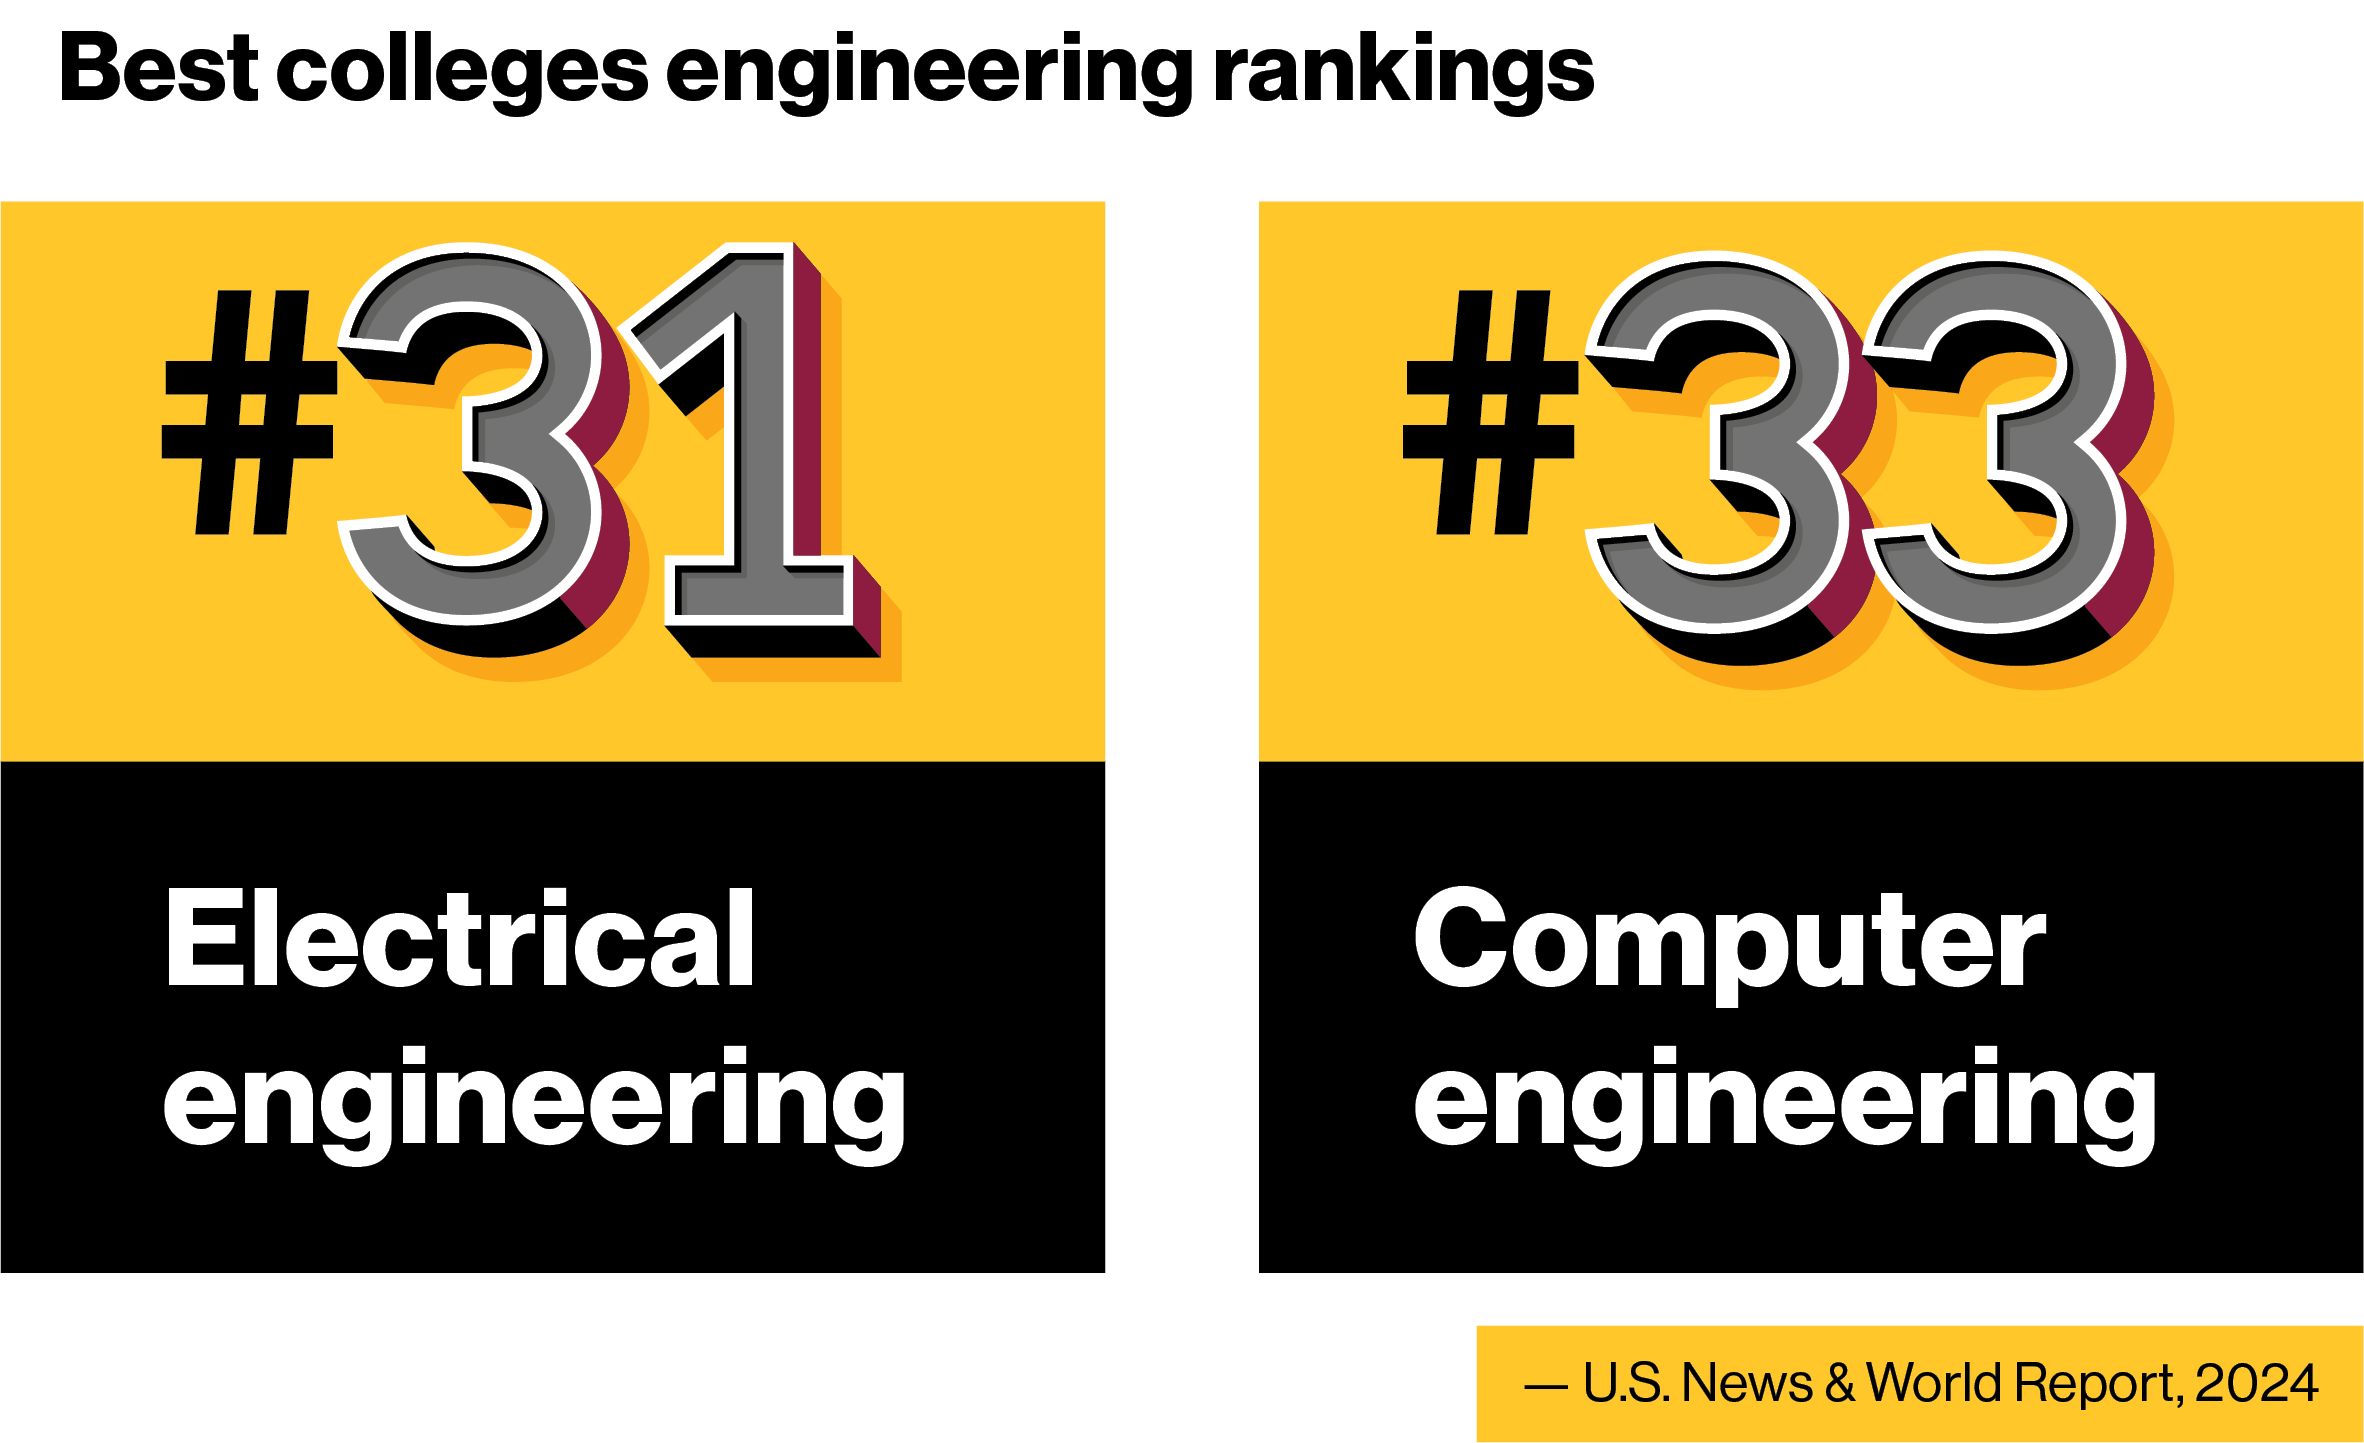 Electrical engineering ranked number 31 and computer engineering ranked number 33 in best colleges engineering rankings from U.S. News and World Report, 2024